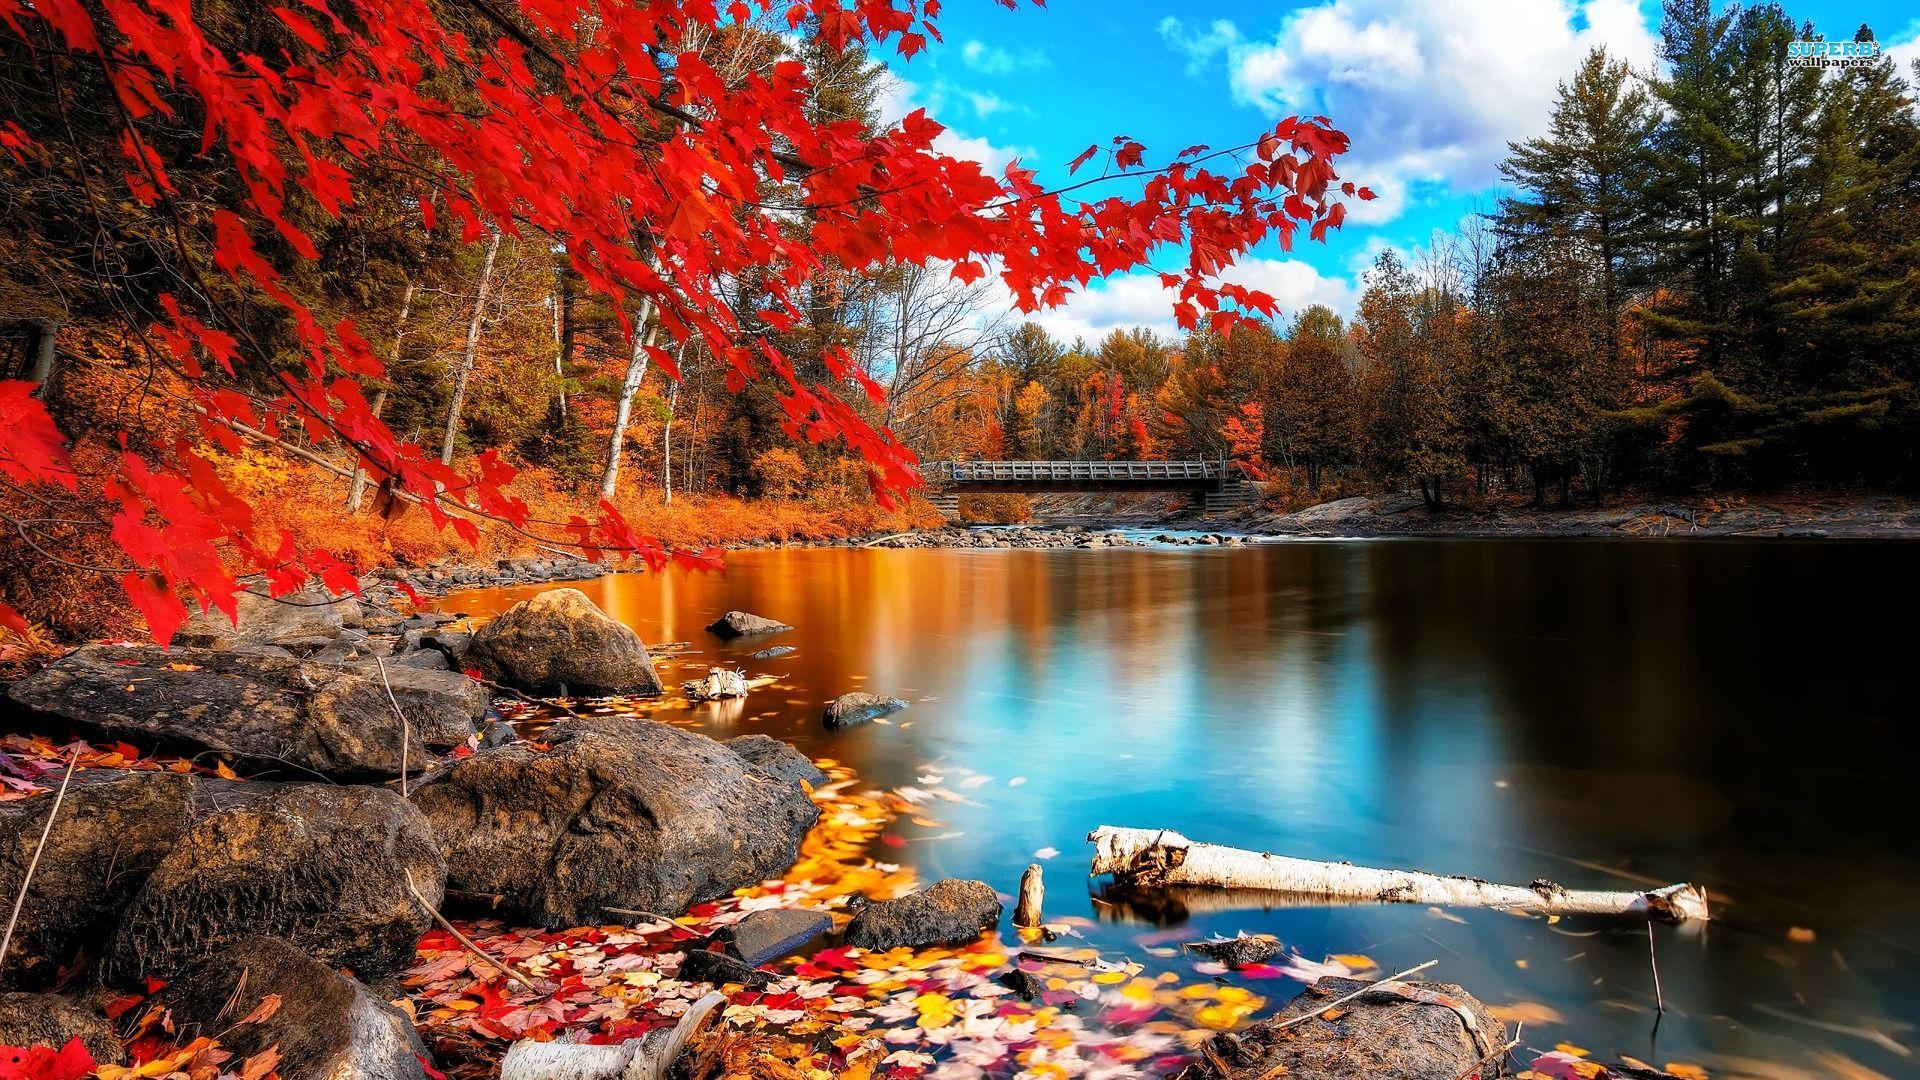 Autumn Beauty HD Wallpaper. Awesome photo. Nature